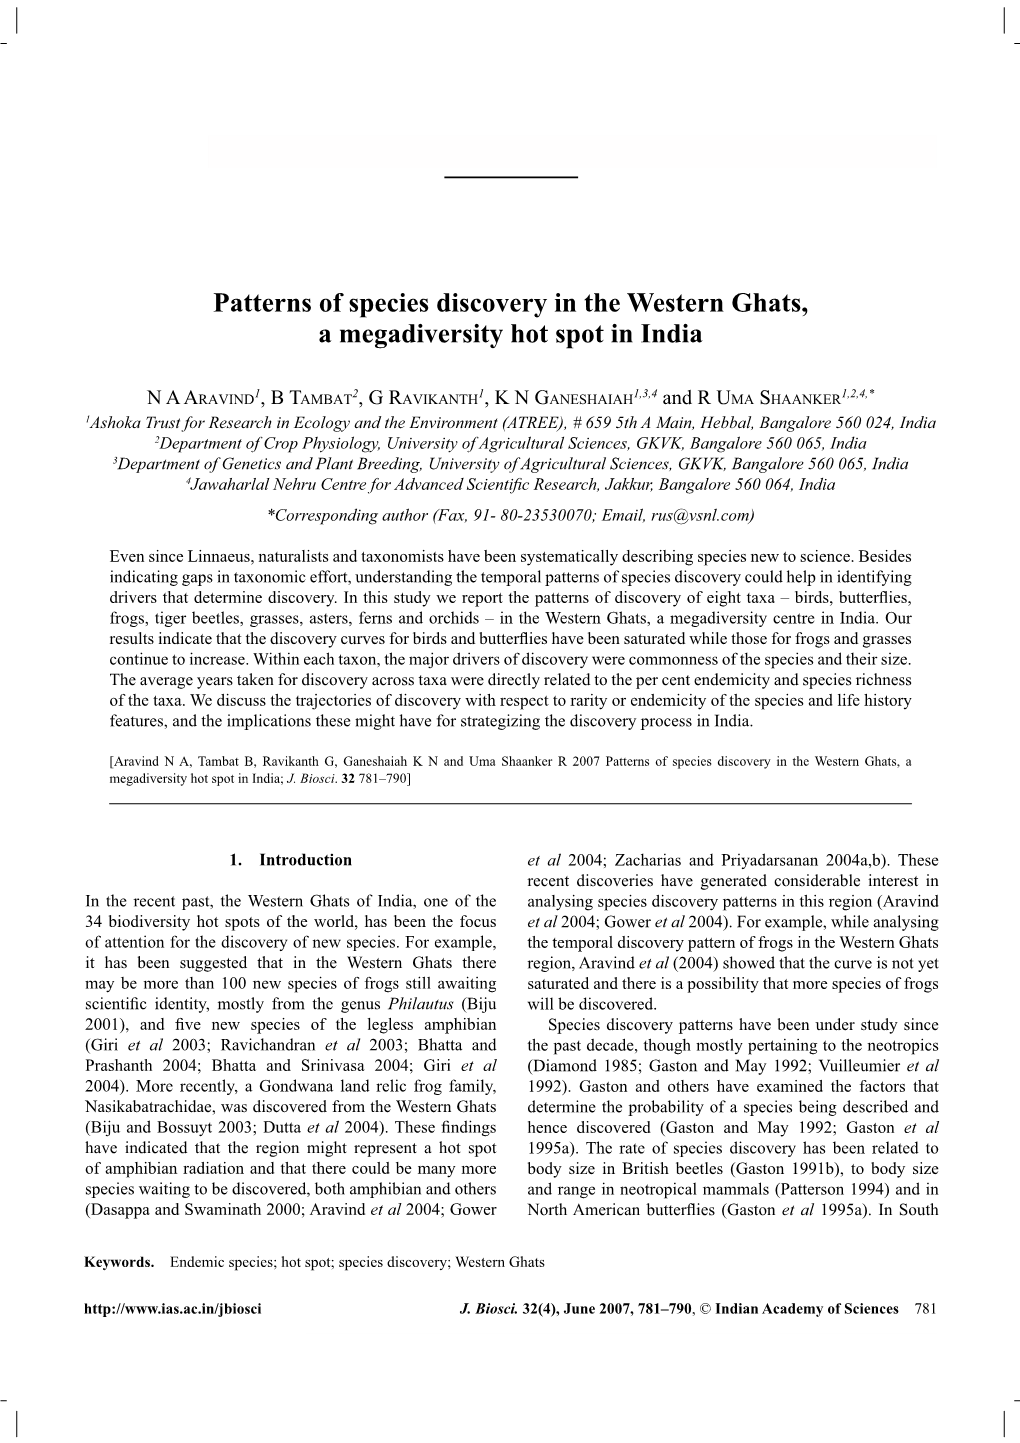 Patterns of Species Discovery in the Western Ghats, a Megadiversity Hot Spot in India